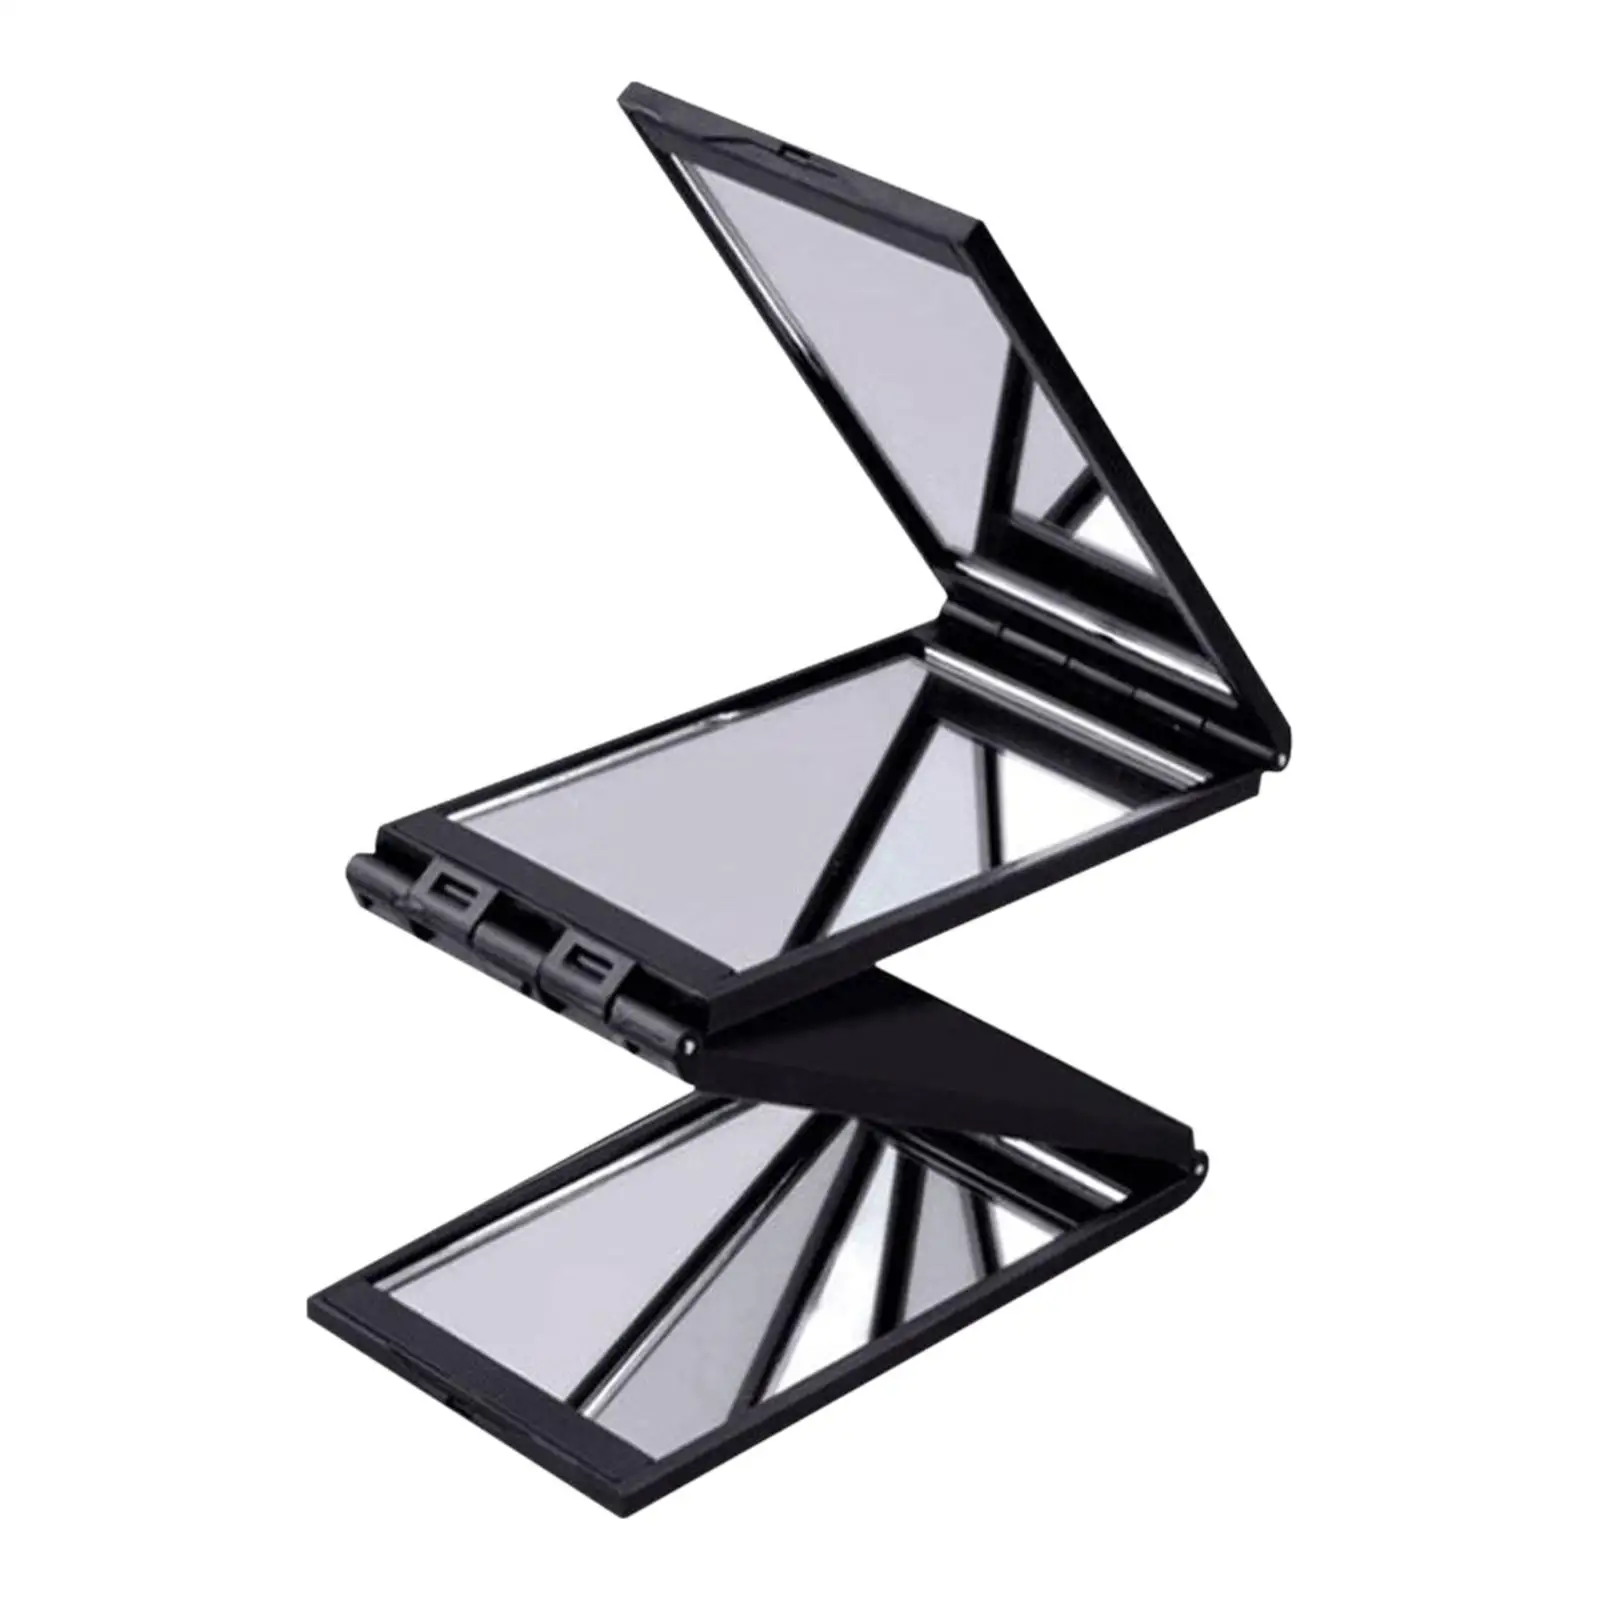 4 Sided Foldable Makeup Mirror Clear Travel for Skincare Bathroom Makeup